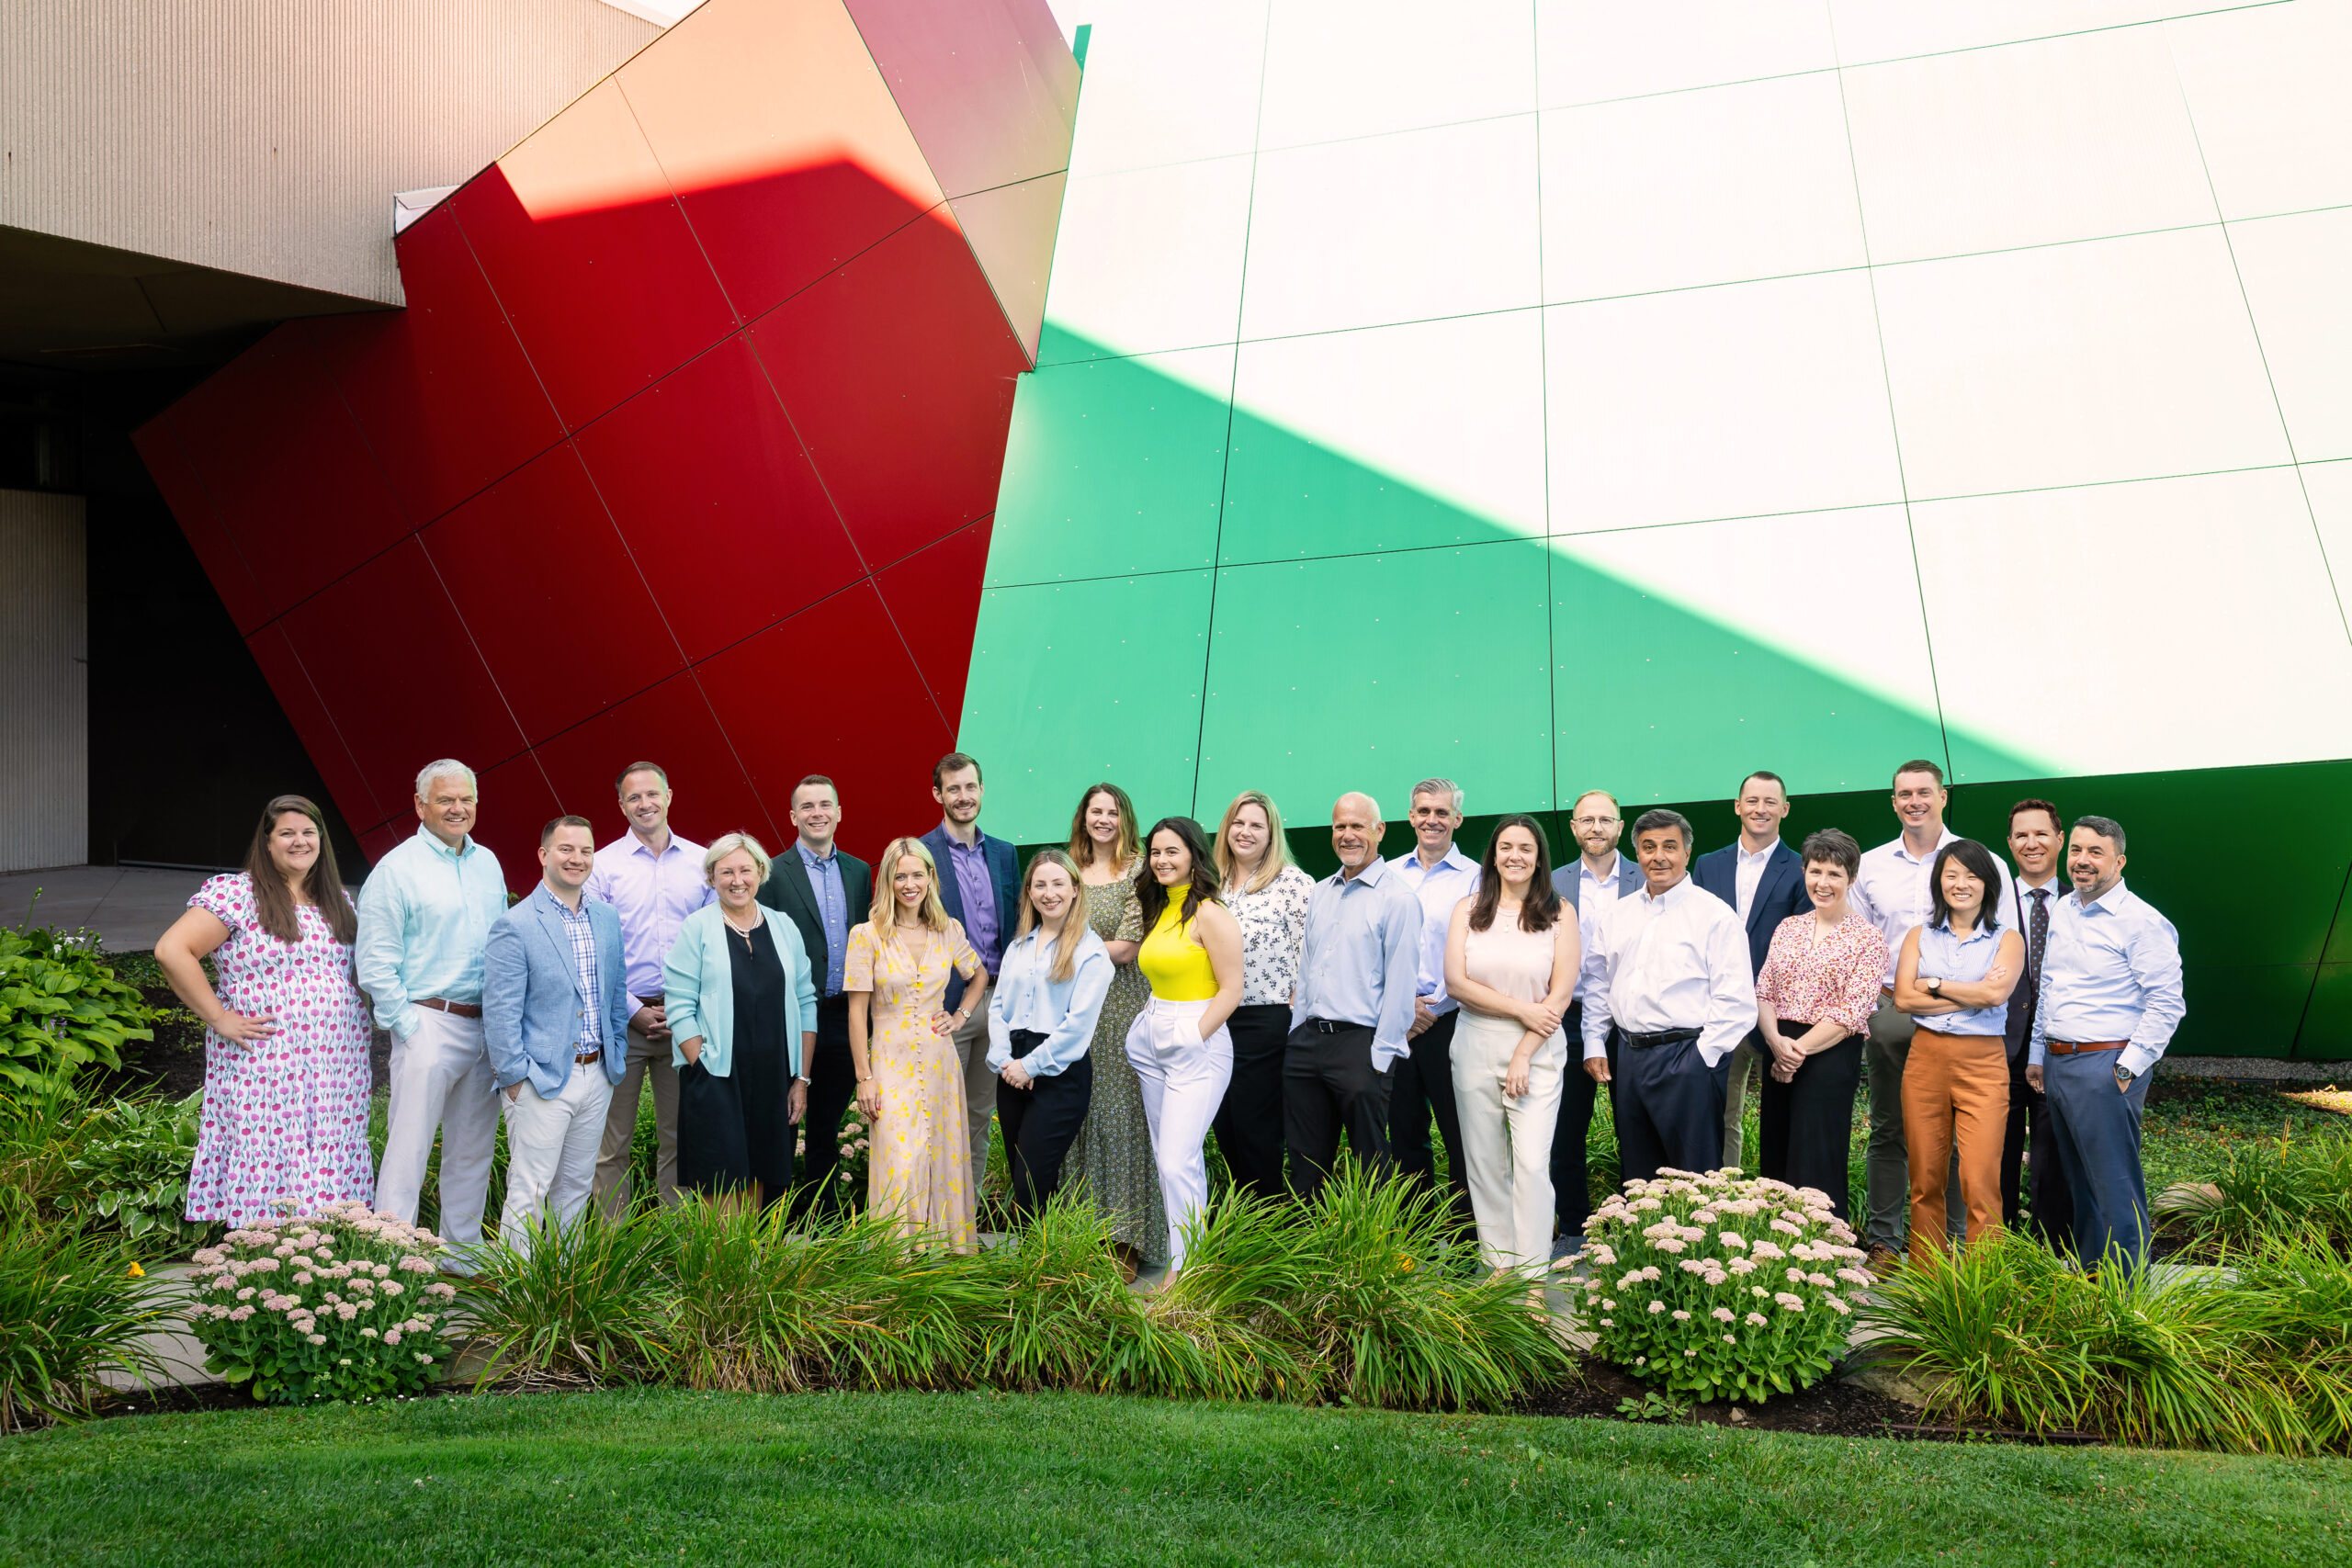 the Howe & Rusling team standing in front of the Strong Museum of Play on a sunny summer day